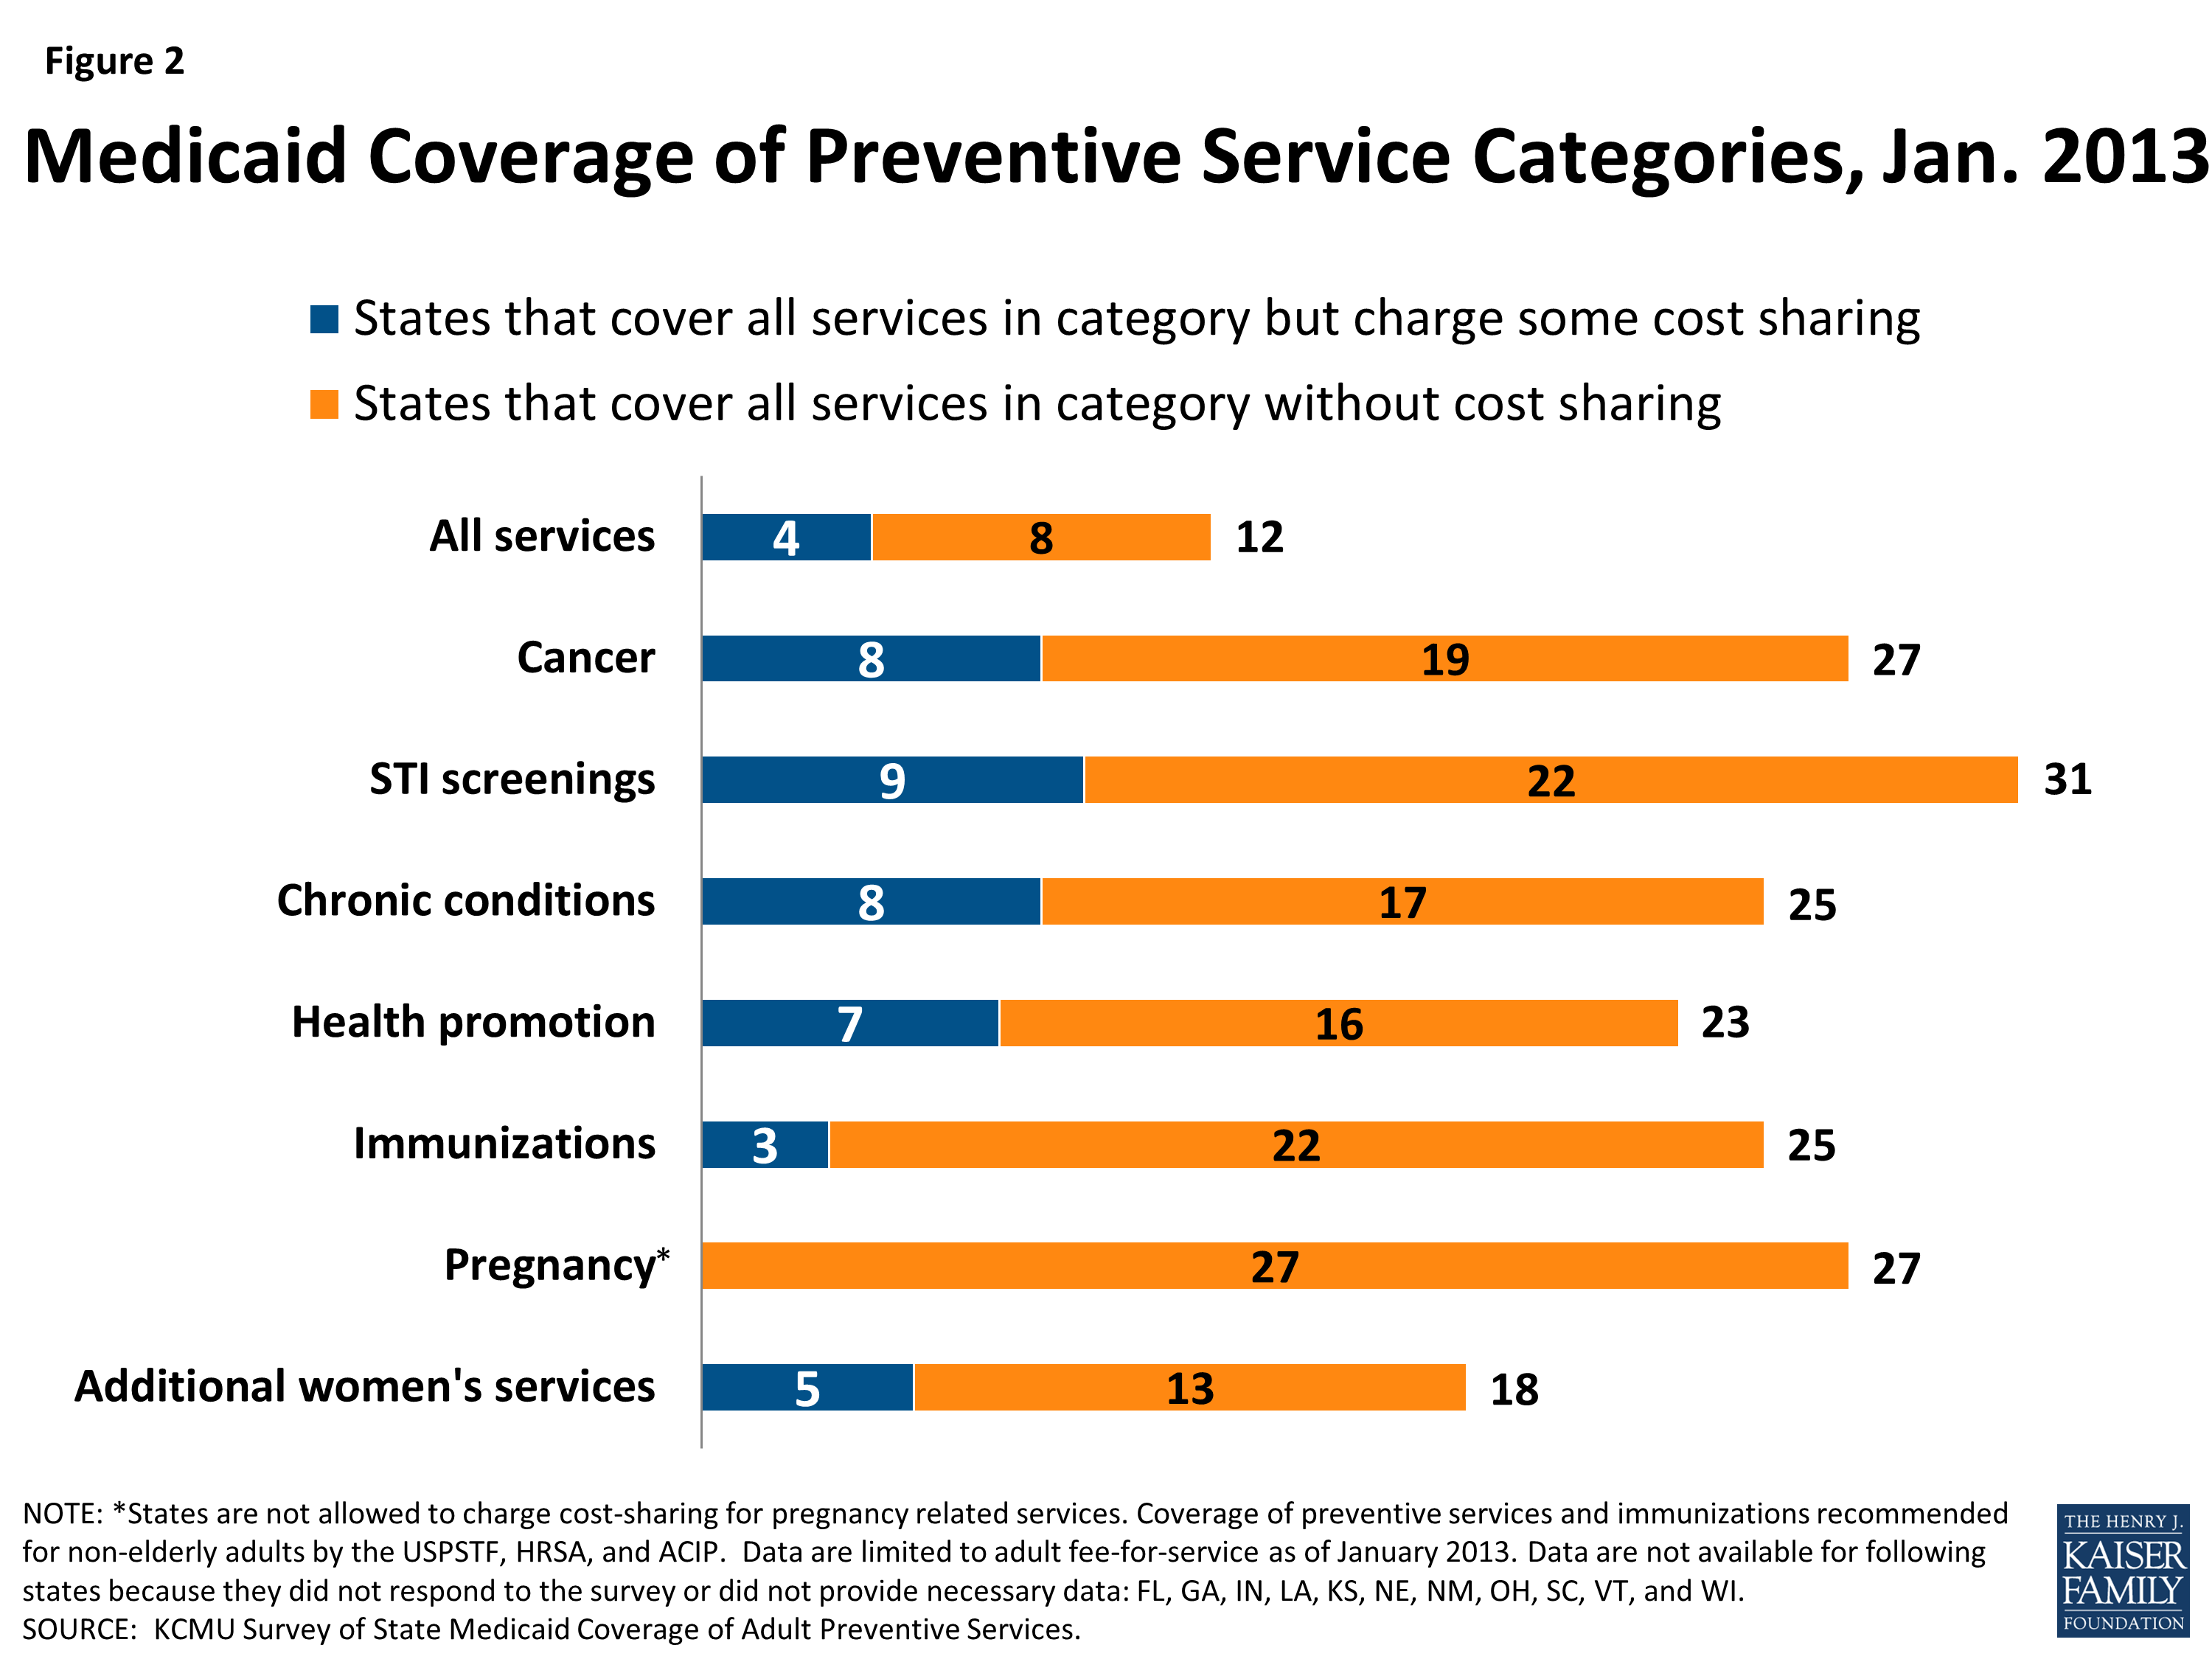 Coverage of Preventive Services for Adults in Medicaid | The ...